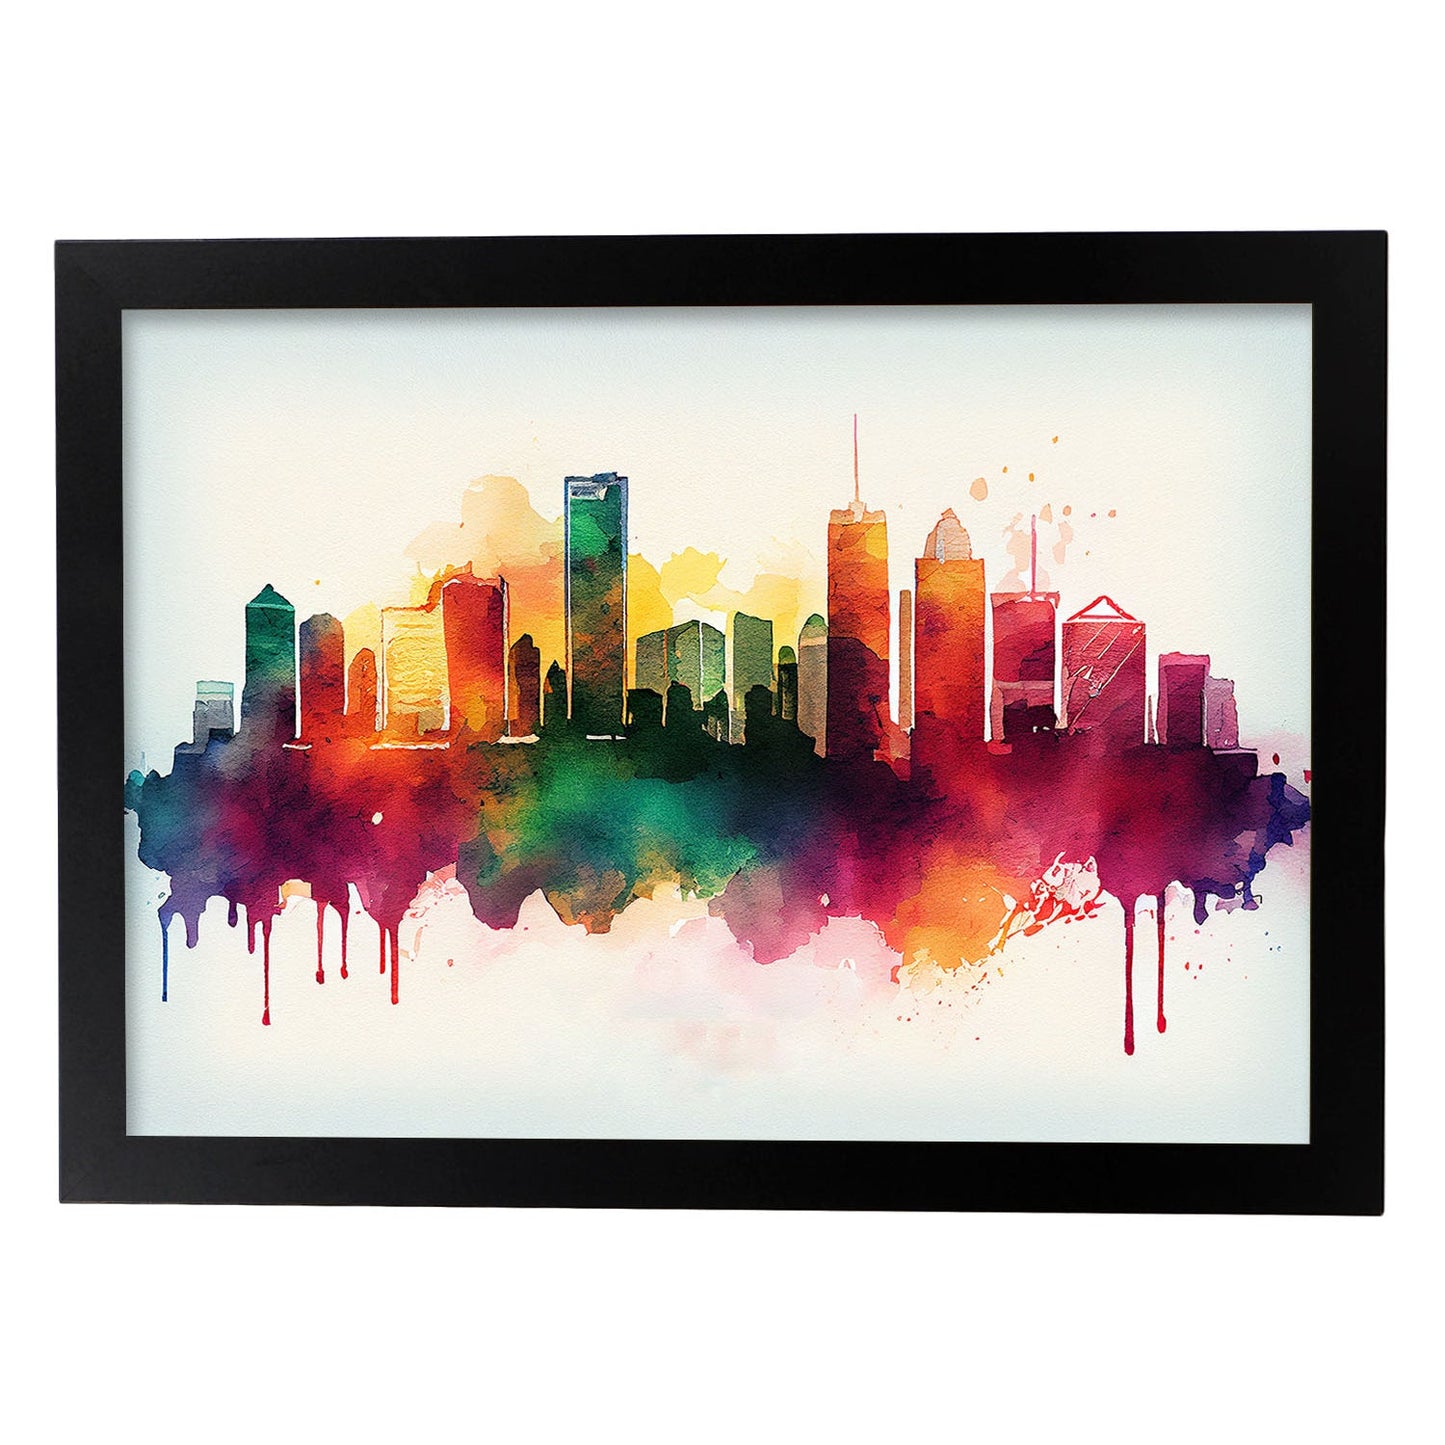 Nacnic watercolor of a skyline of the city of Miami_2. Aesthetic Wall Art Prints for Bedroom or Living Room Design.